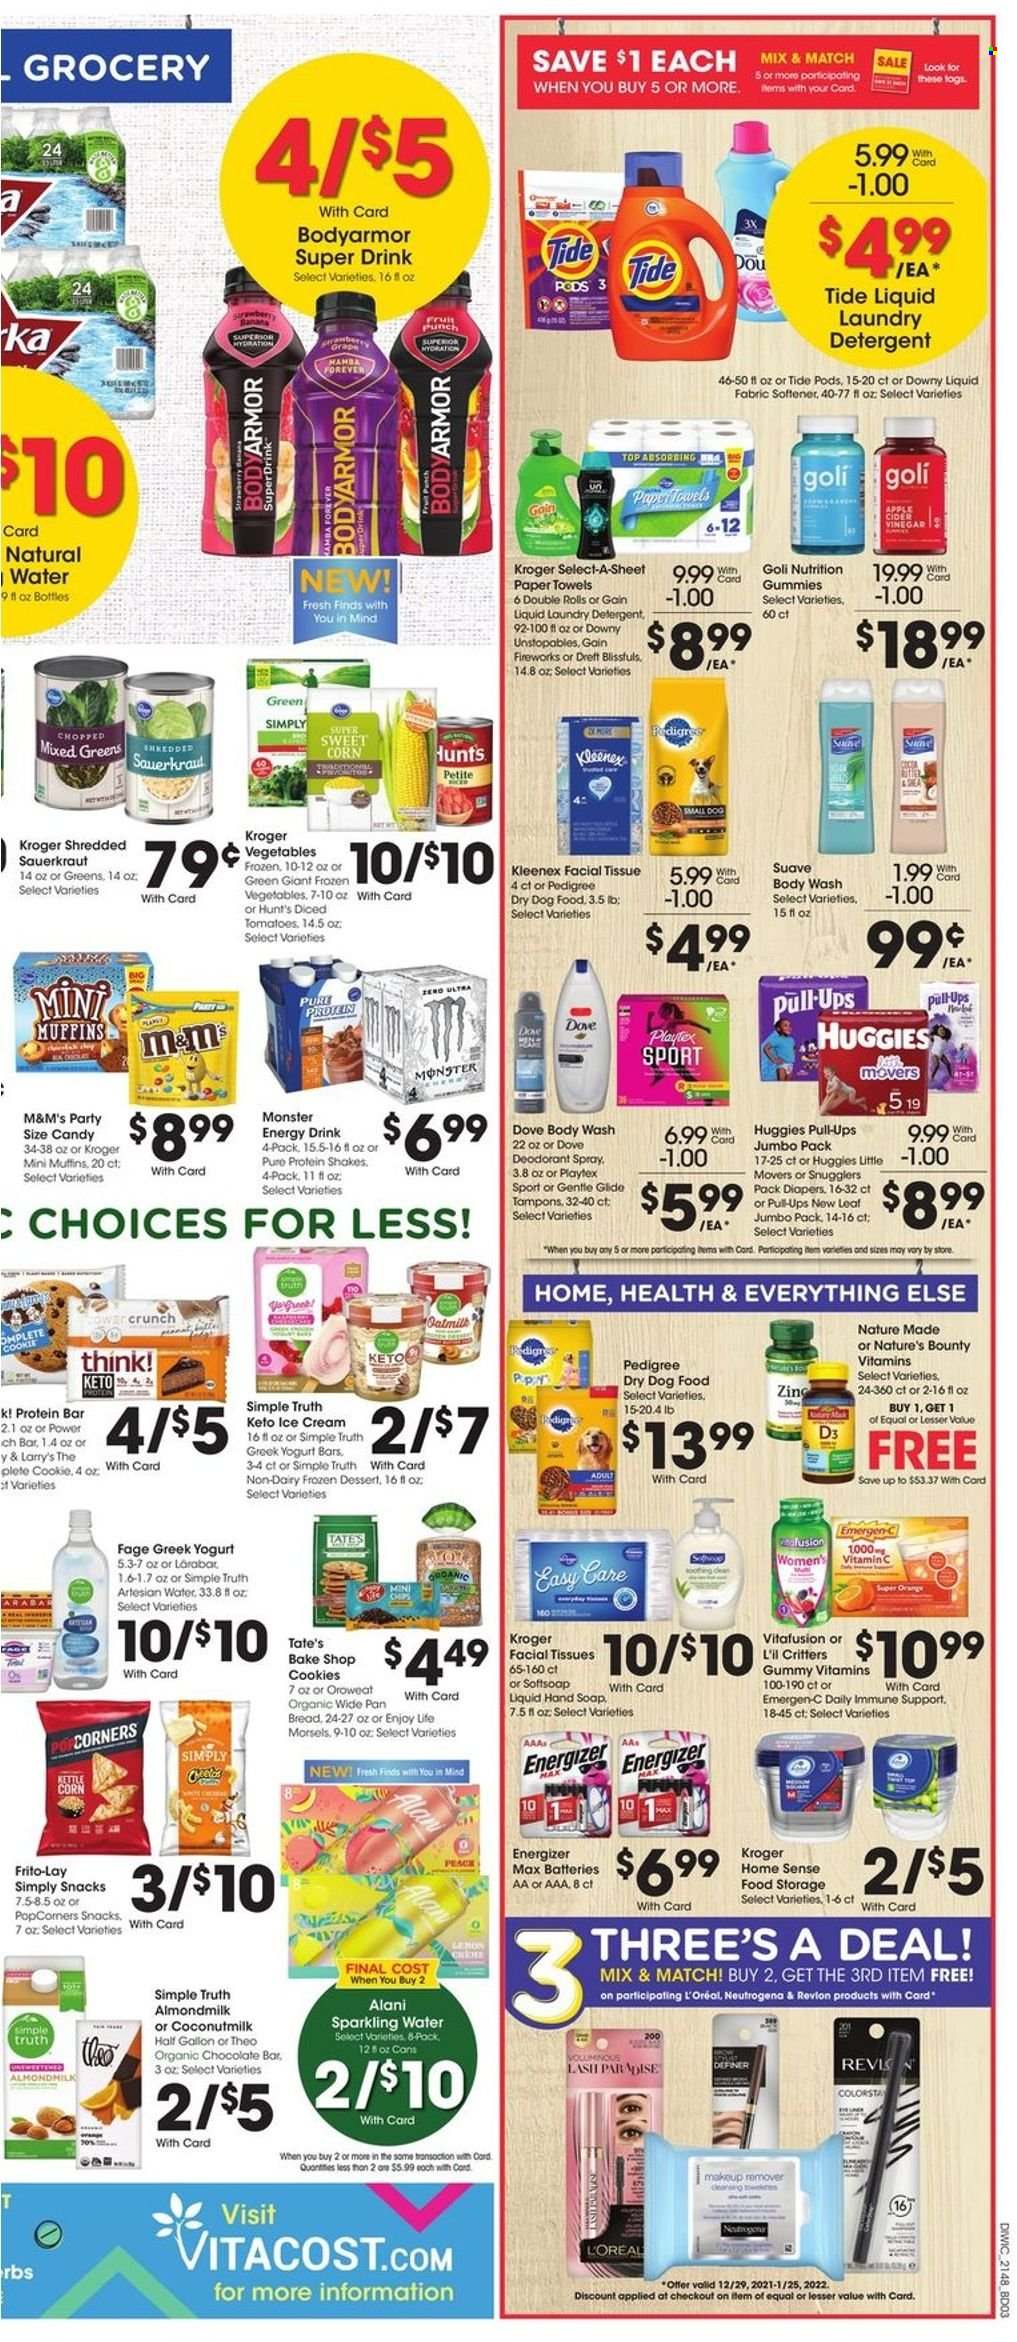 thumbnail - Dillons Flyer - 12/29/2021 - 01/04/2022 - Sales products - muffin, tomatoes, sweet corn, greek yoghurt, almond milk, protein drink, shake, ice cream, Enlightened lce Cream, frozen vegetables, cookies, snack, M&M's, chocolate bar, kettle corn, popcorn, Frito-Lay, coconut milk, sauerkraut, protein bar, energy drink, Monster, sparkling water, punch, Huggies, nappies, Dove, Kleenex, tissues, kitchen towels, paper towels, detergent, Gain, Tide, Unstopables, fabric softener, laundry detergent, Gain Fireworks, Downy Laundry, body wash, Softsoap, Suave, Playtex, tampons, facial tissues, L’Oréal, Neutrogena, anti-perspirant, deodorant, makeup remover, pan, battery, Energizer, animal food, dog food, Pedigree, dry dog food, Nature Made, Nature's Bounty, Vitafusion, vitamin c, Emergen-C, vitamin D3. Page 6.